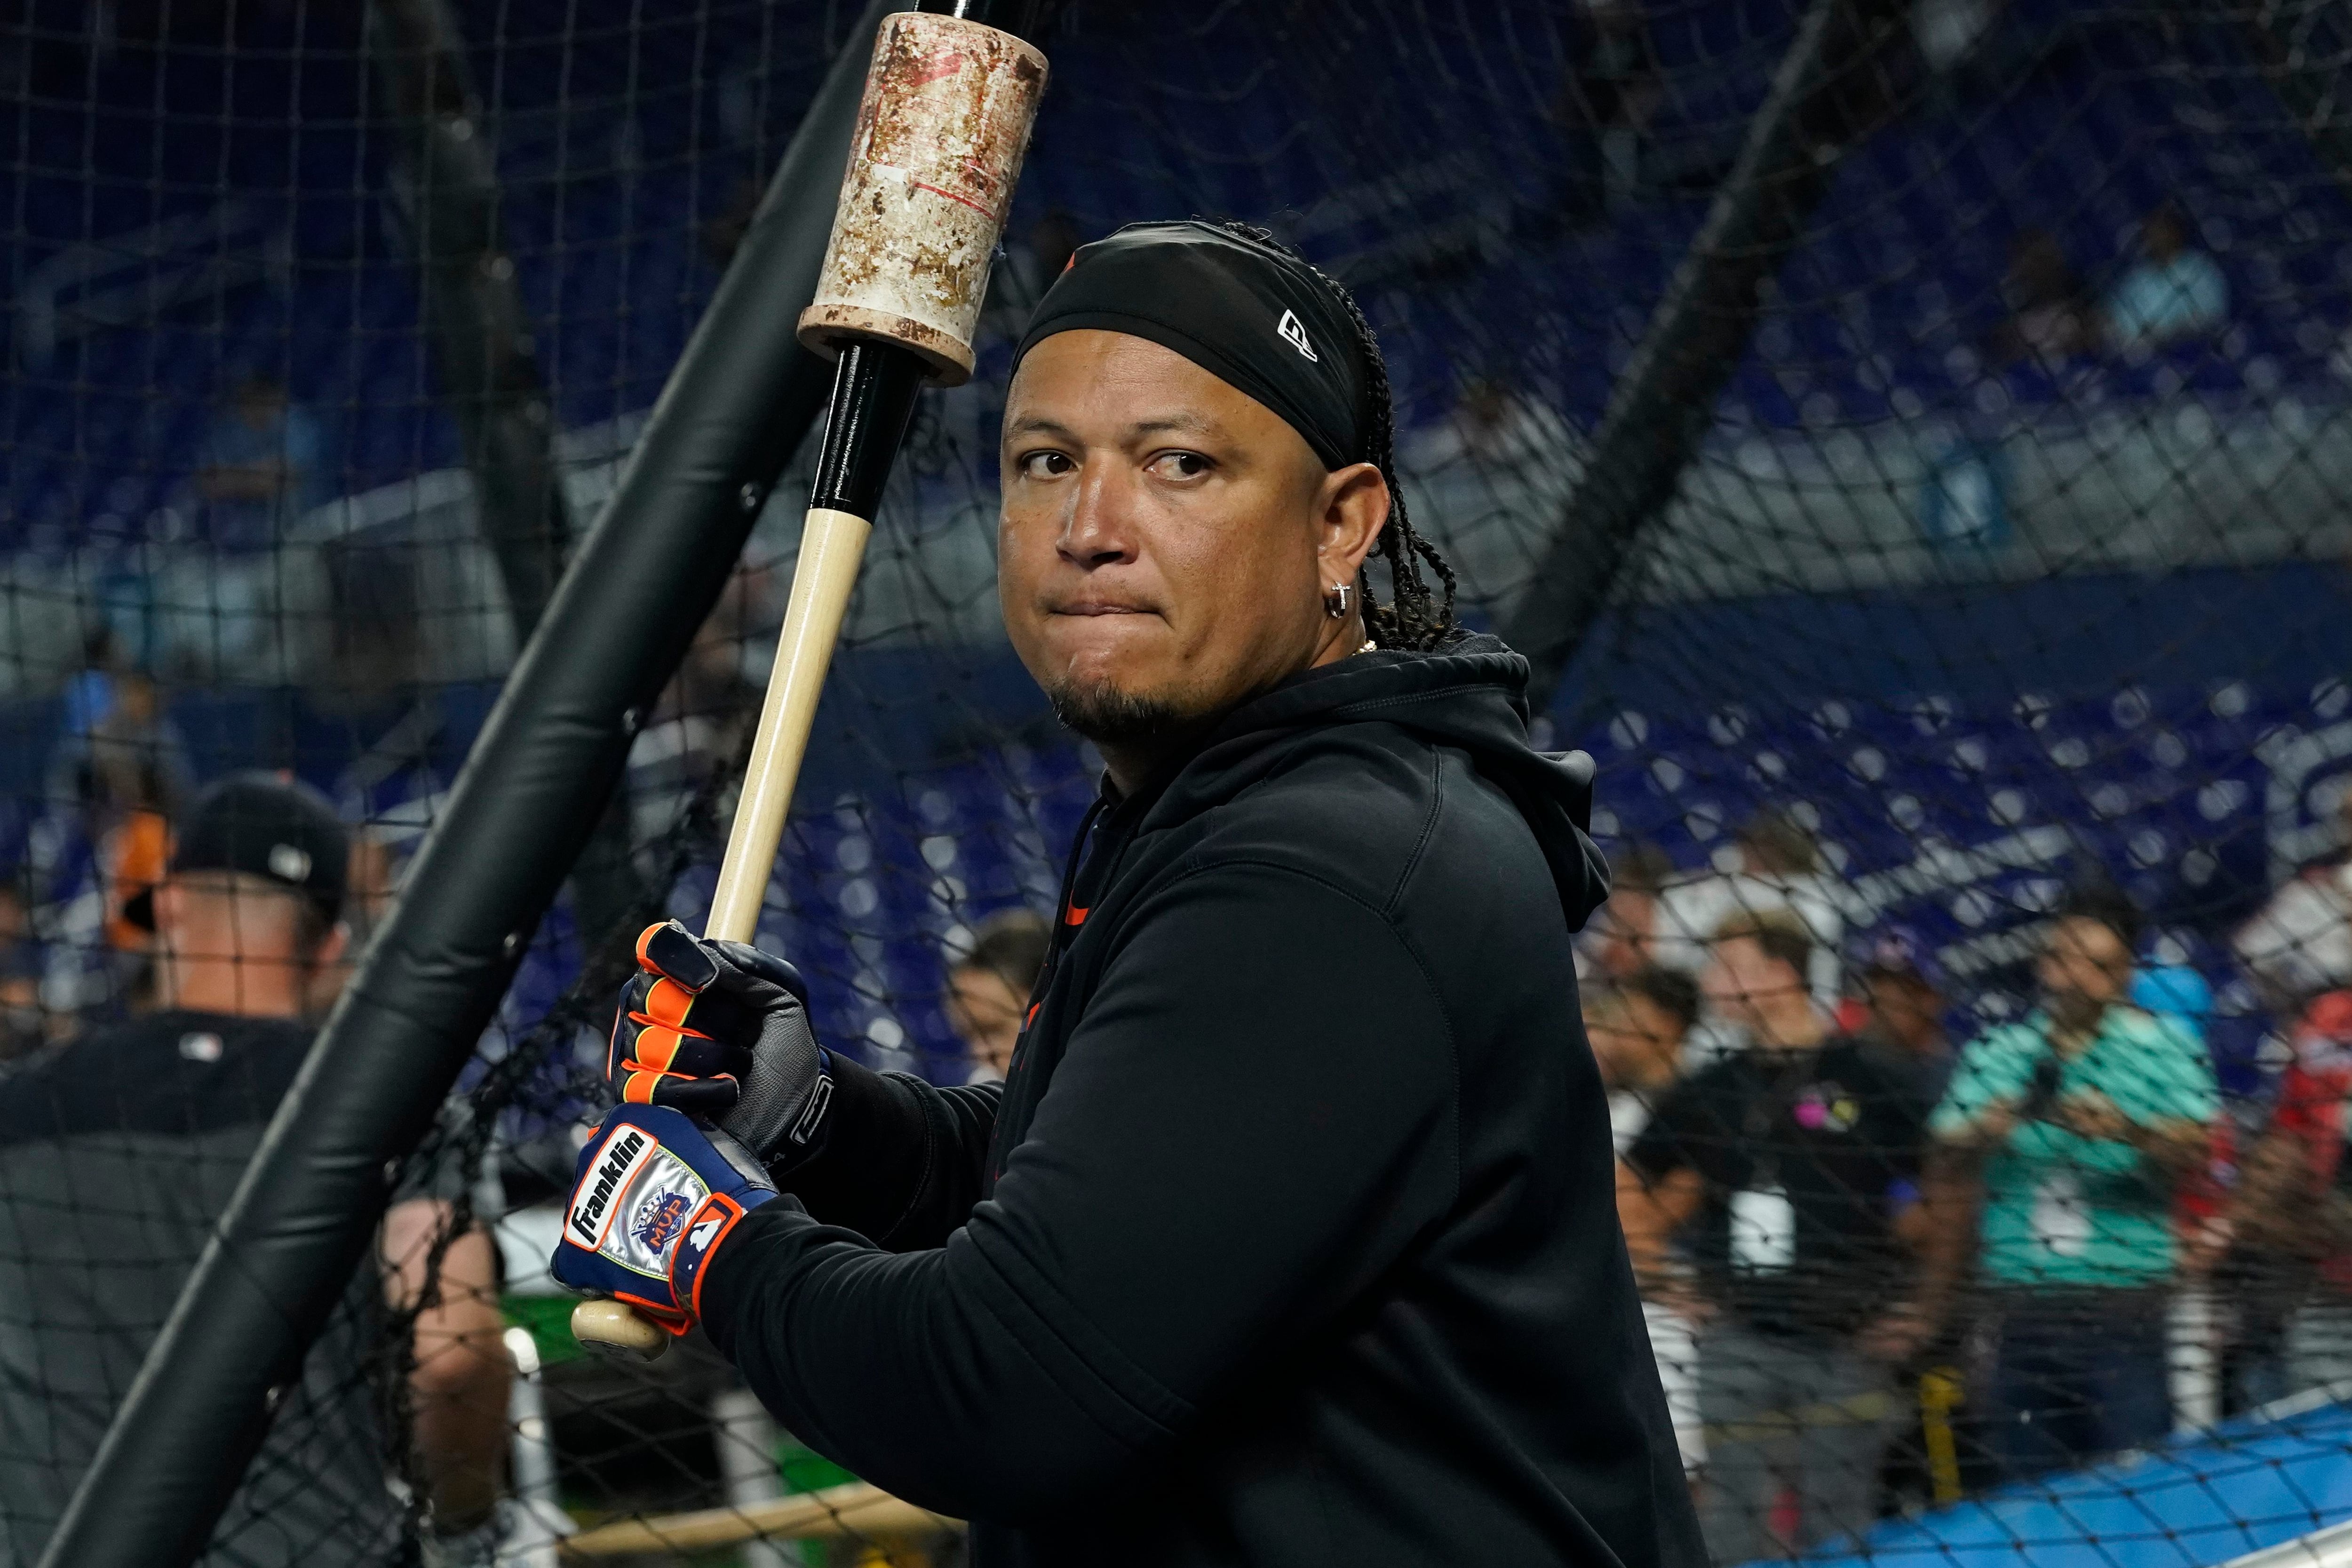 Detroit Tigers Community Impact on X: The Miguel Cabrera Family